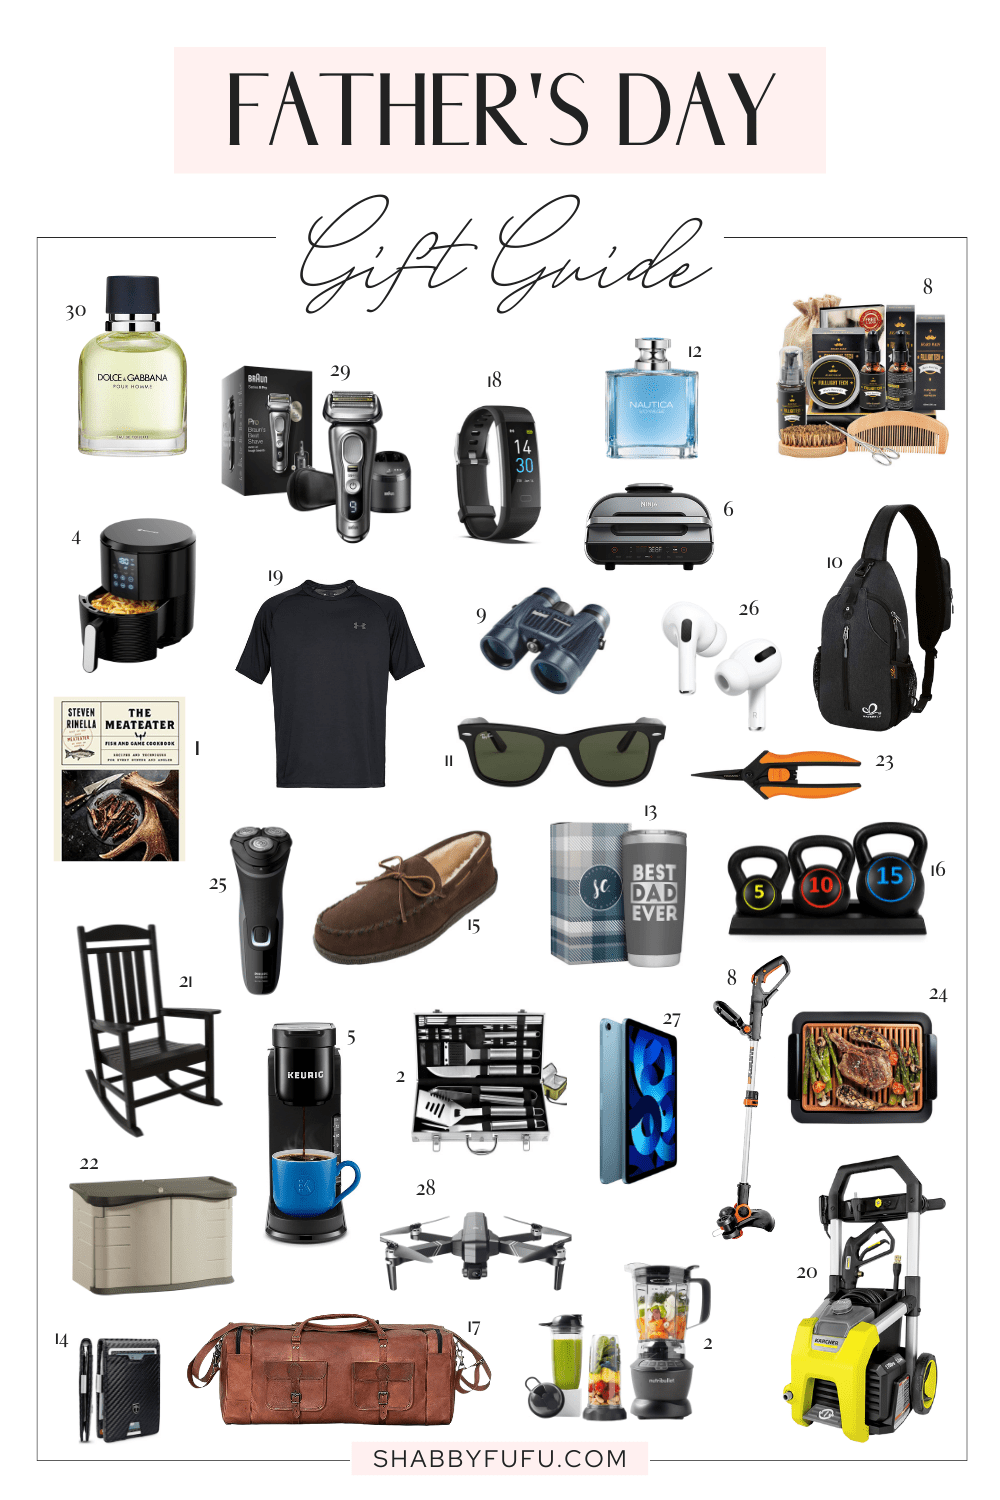 10 Fathers Day Gifts Your Dad Needs For The Garage - Organization, Garage  Gifts For Men 